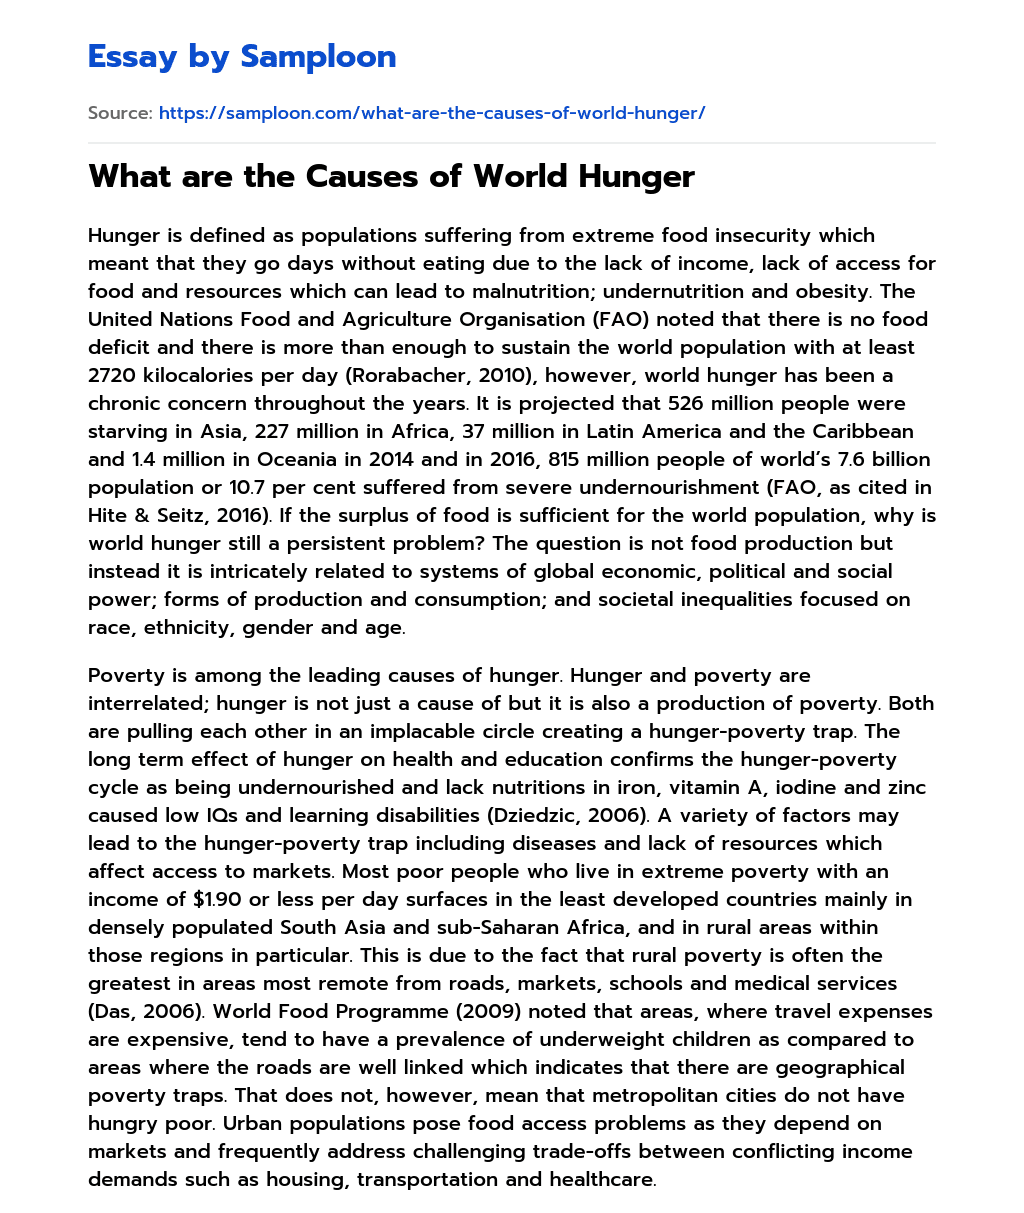 What are the Causes of World Hunger essay